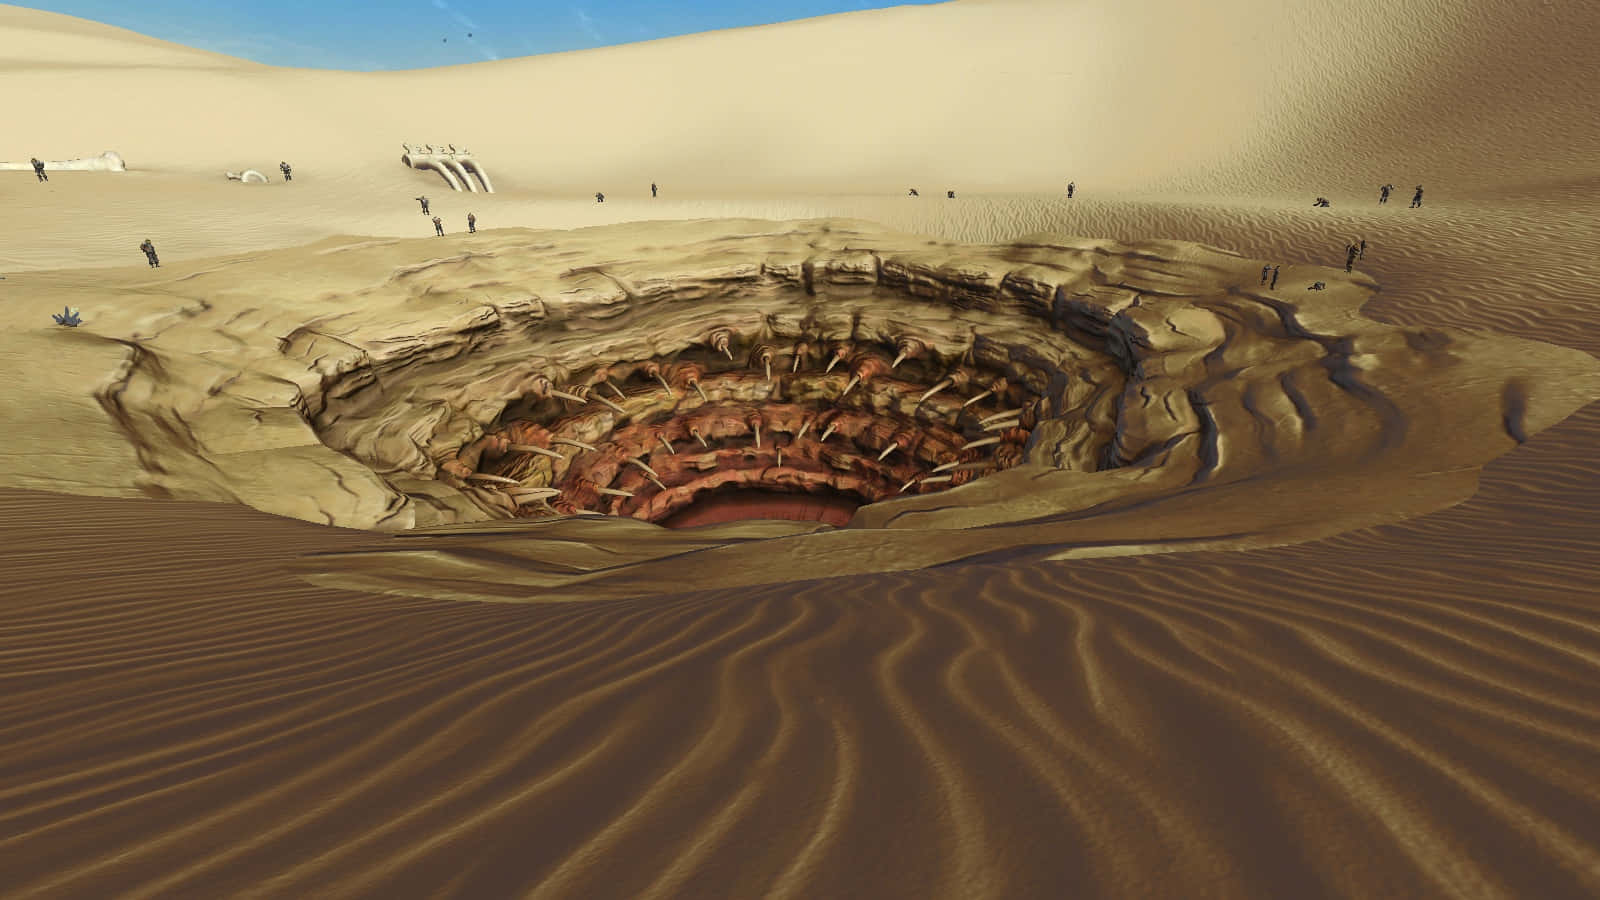 The menacing Sarlacc awaits in the Great Pit of Carkoon! Wallpaper